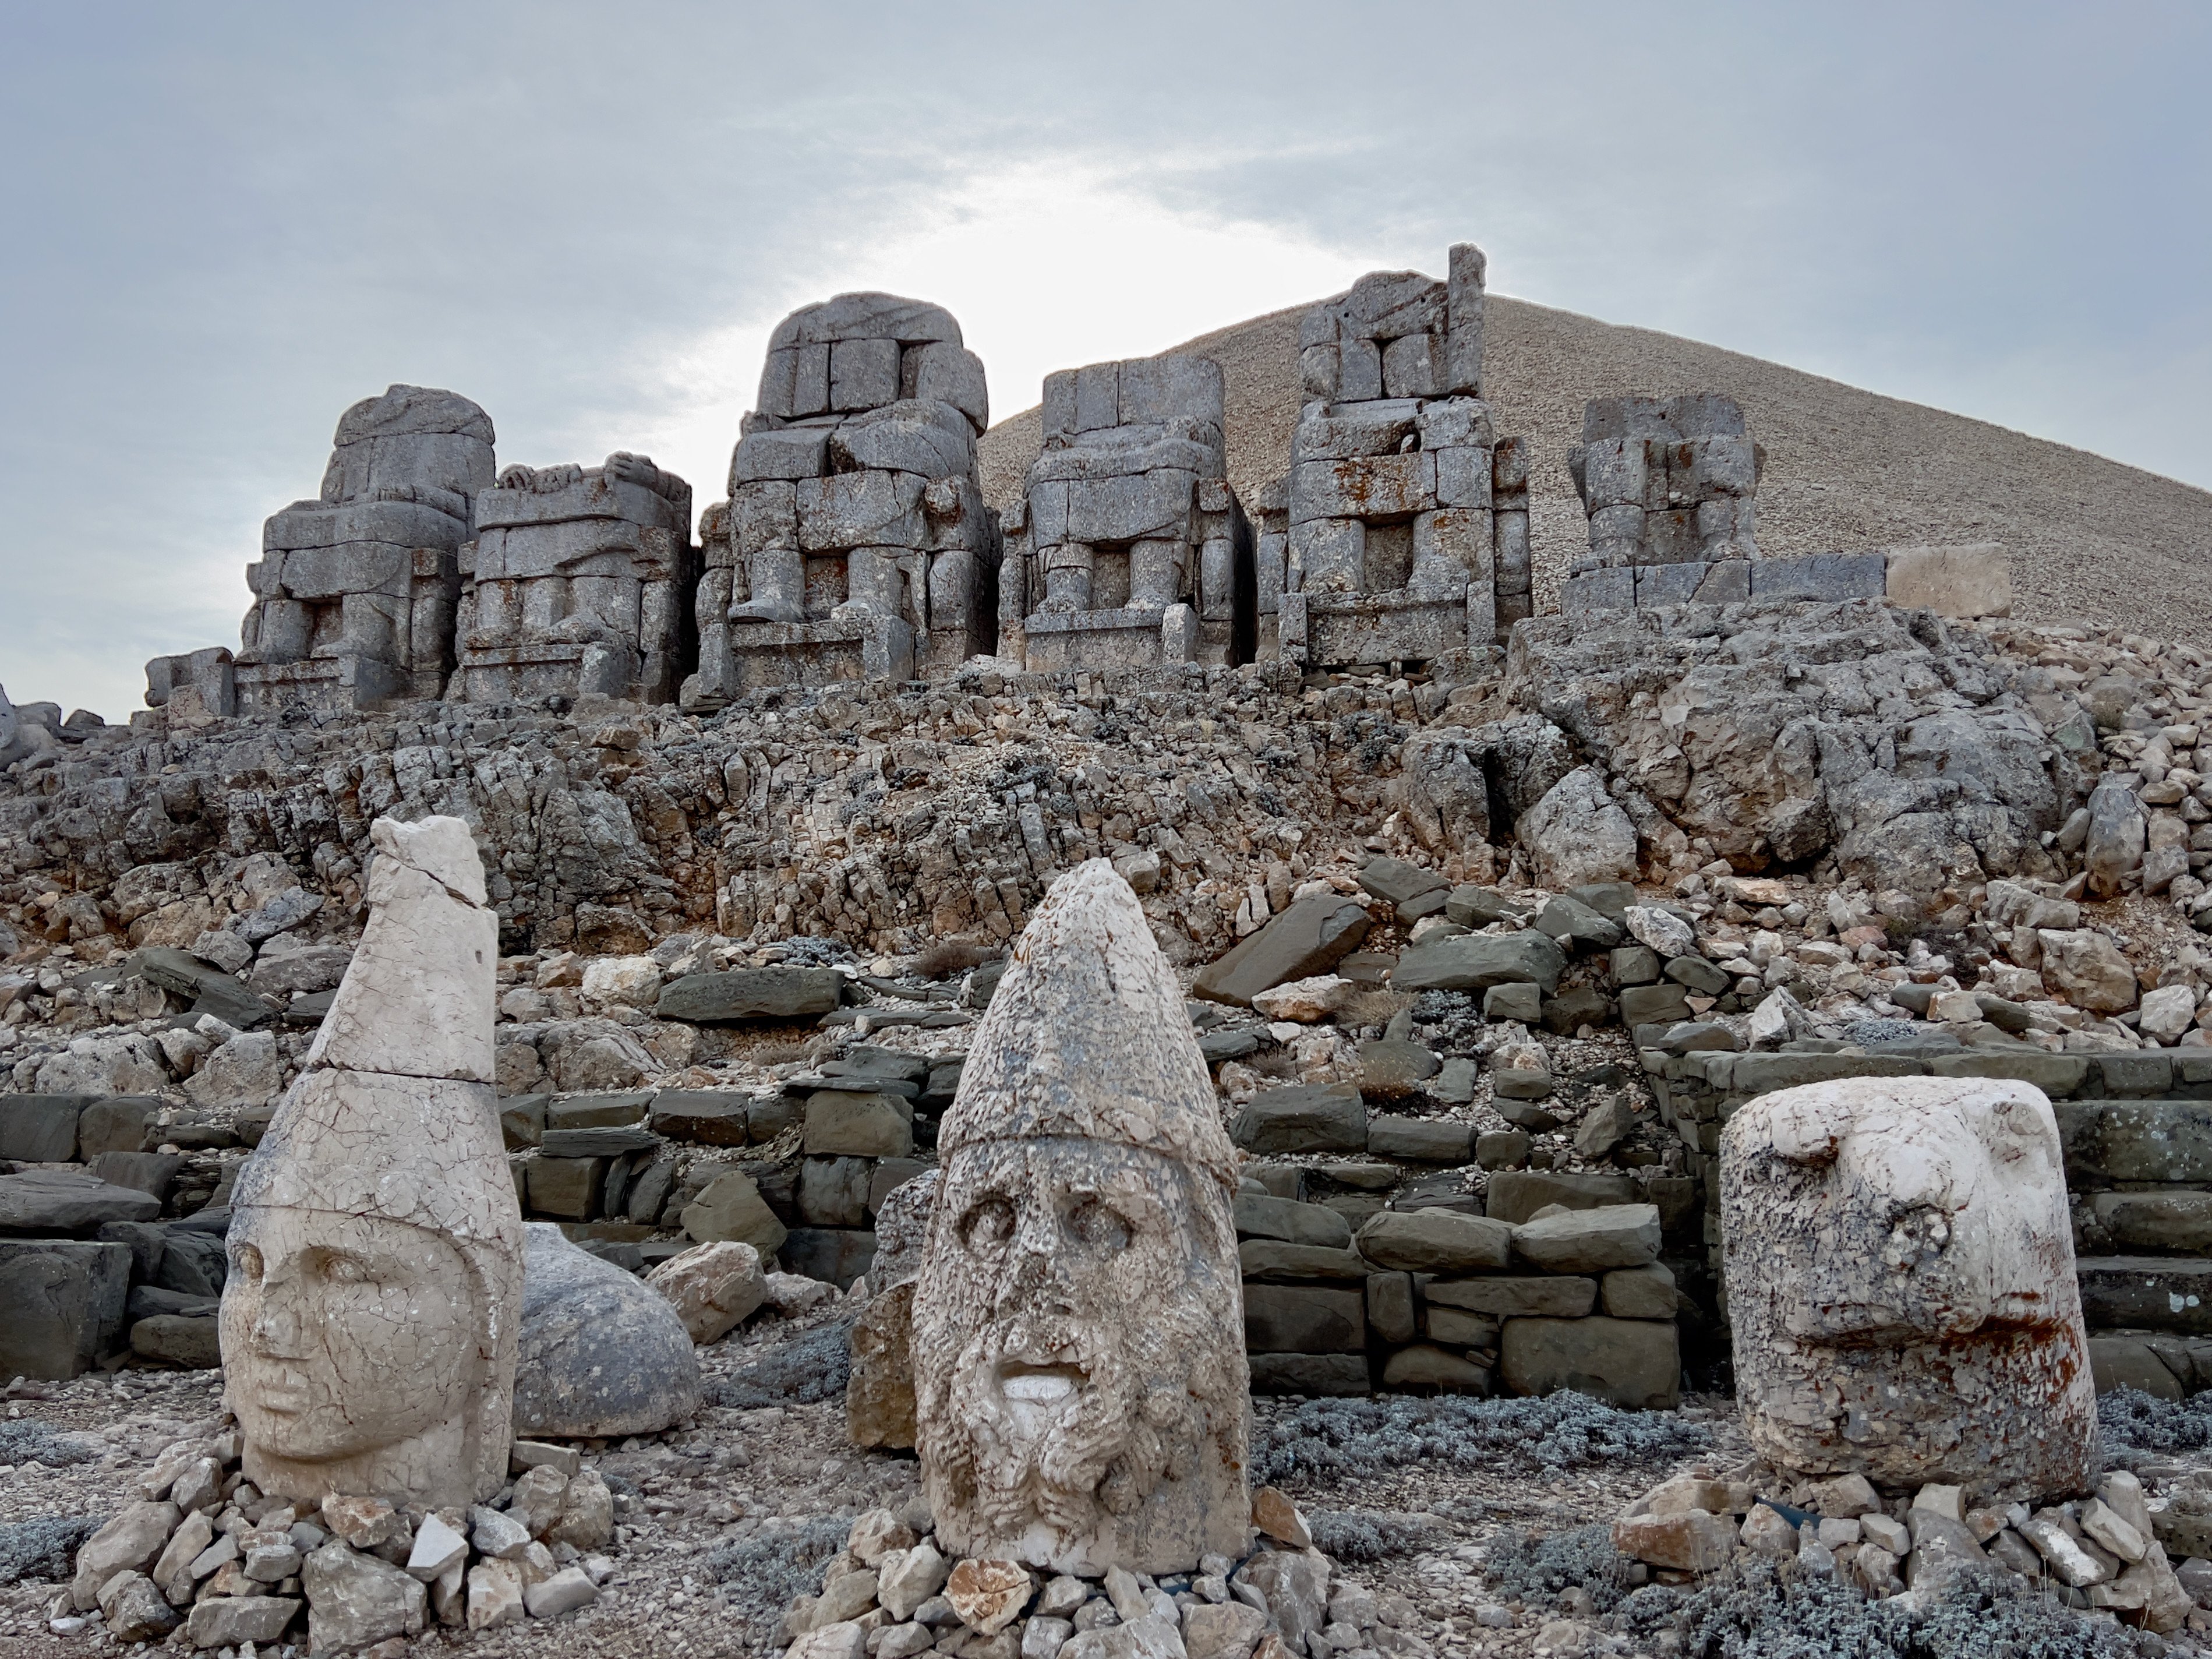 At the burial mound of King Antiochus I, atop Mount Nemrut in Anatolia, Turkey, sit decapitated statues of the king and various Greek and Persian deities. Photo: Peter Neville-Hadley